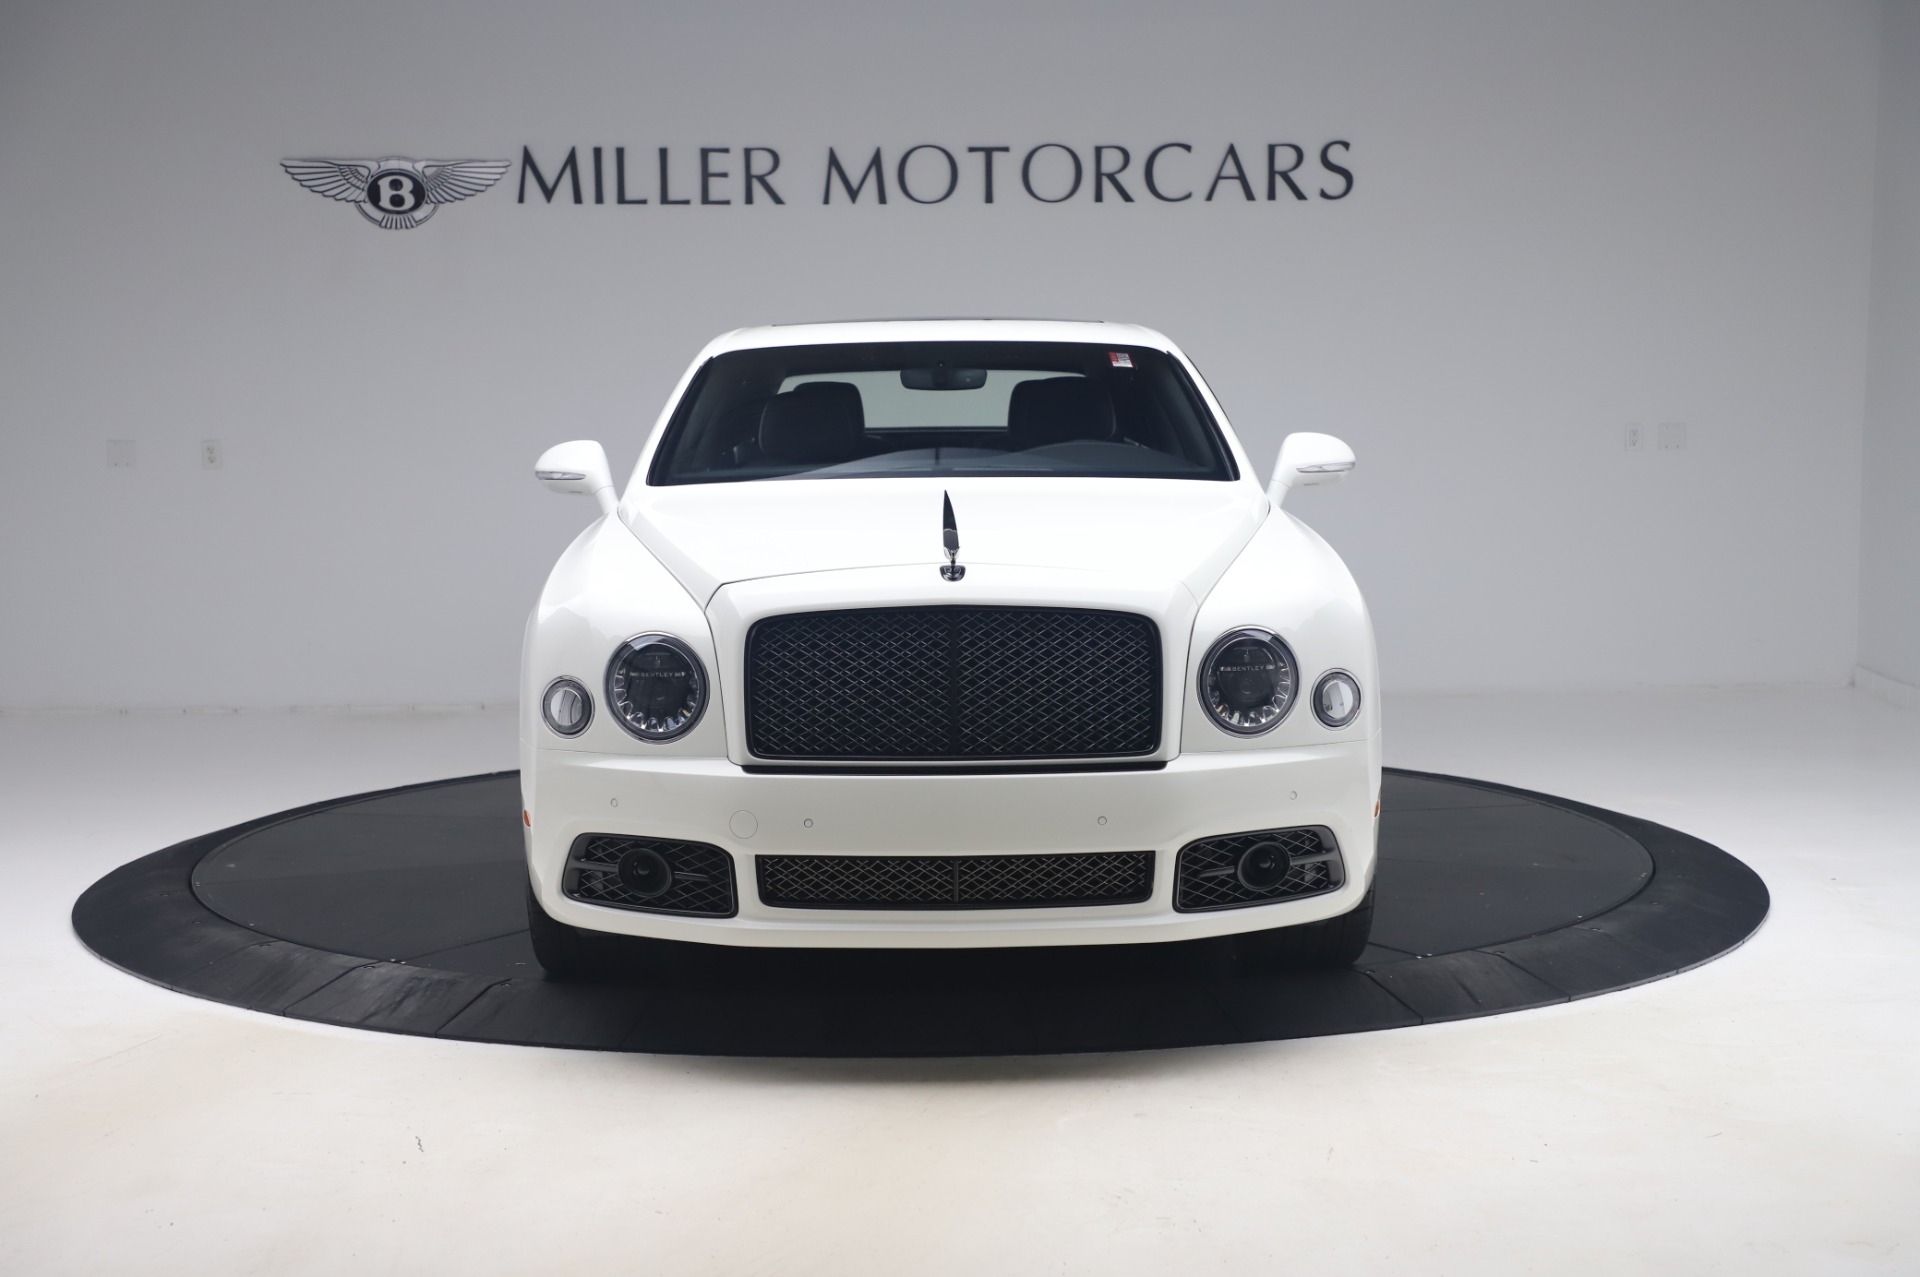 New-2020-Bentley-Mulsanne-675-Edition-by-Mulliner